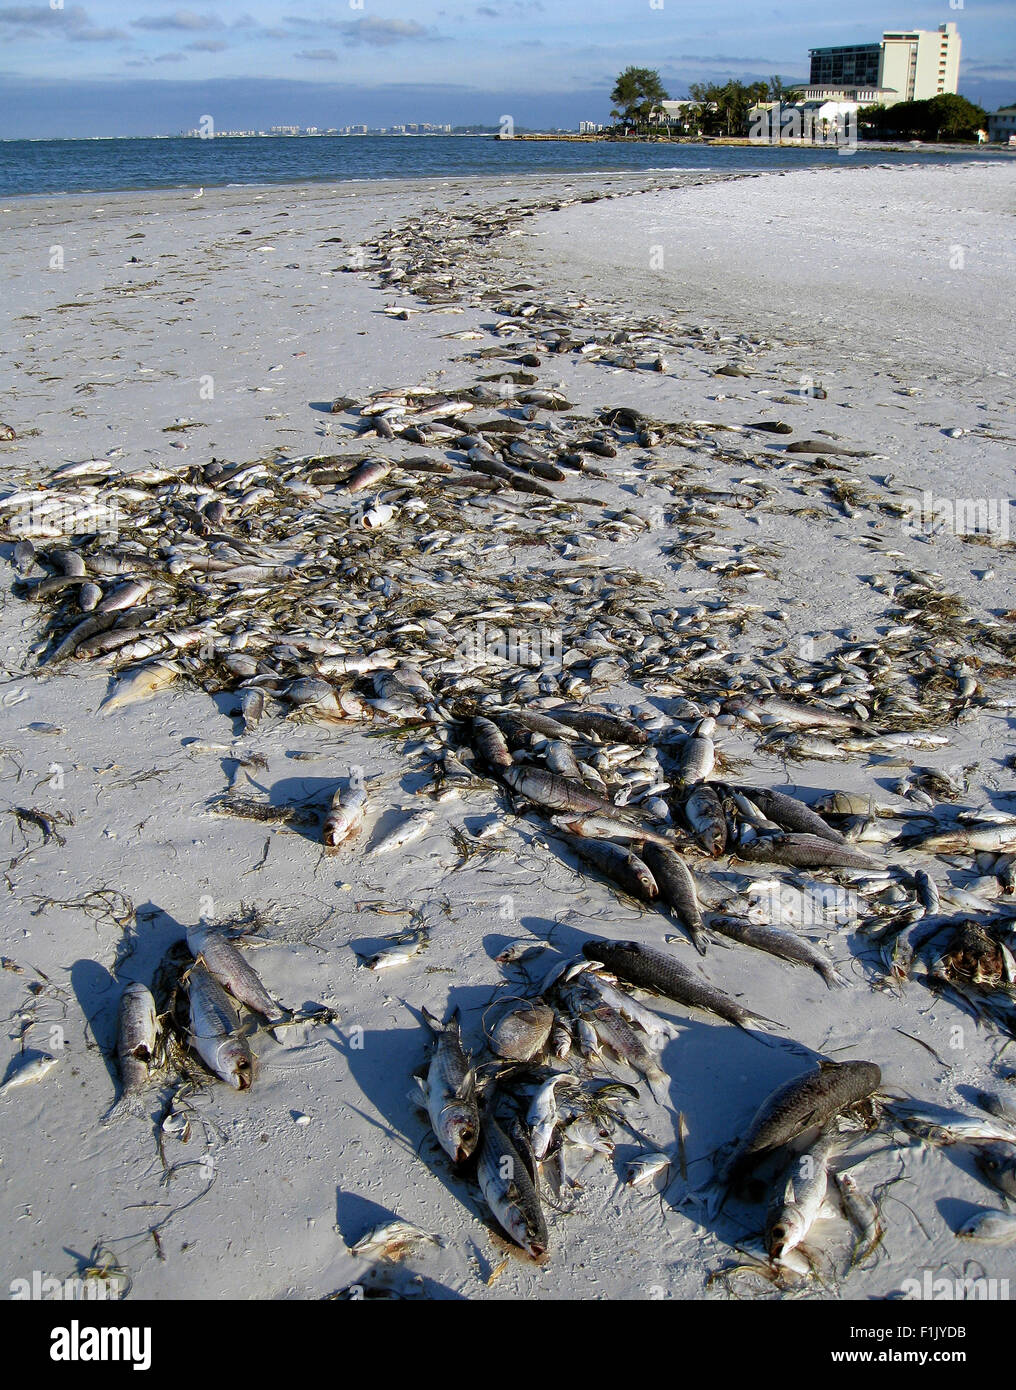 Hundreds of dead fish from the Gulf of Mexico killed by a red tide are  washed up on Siesta Beach at Sarasota, Florida, USA Stock Photo - Alamy